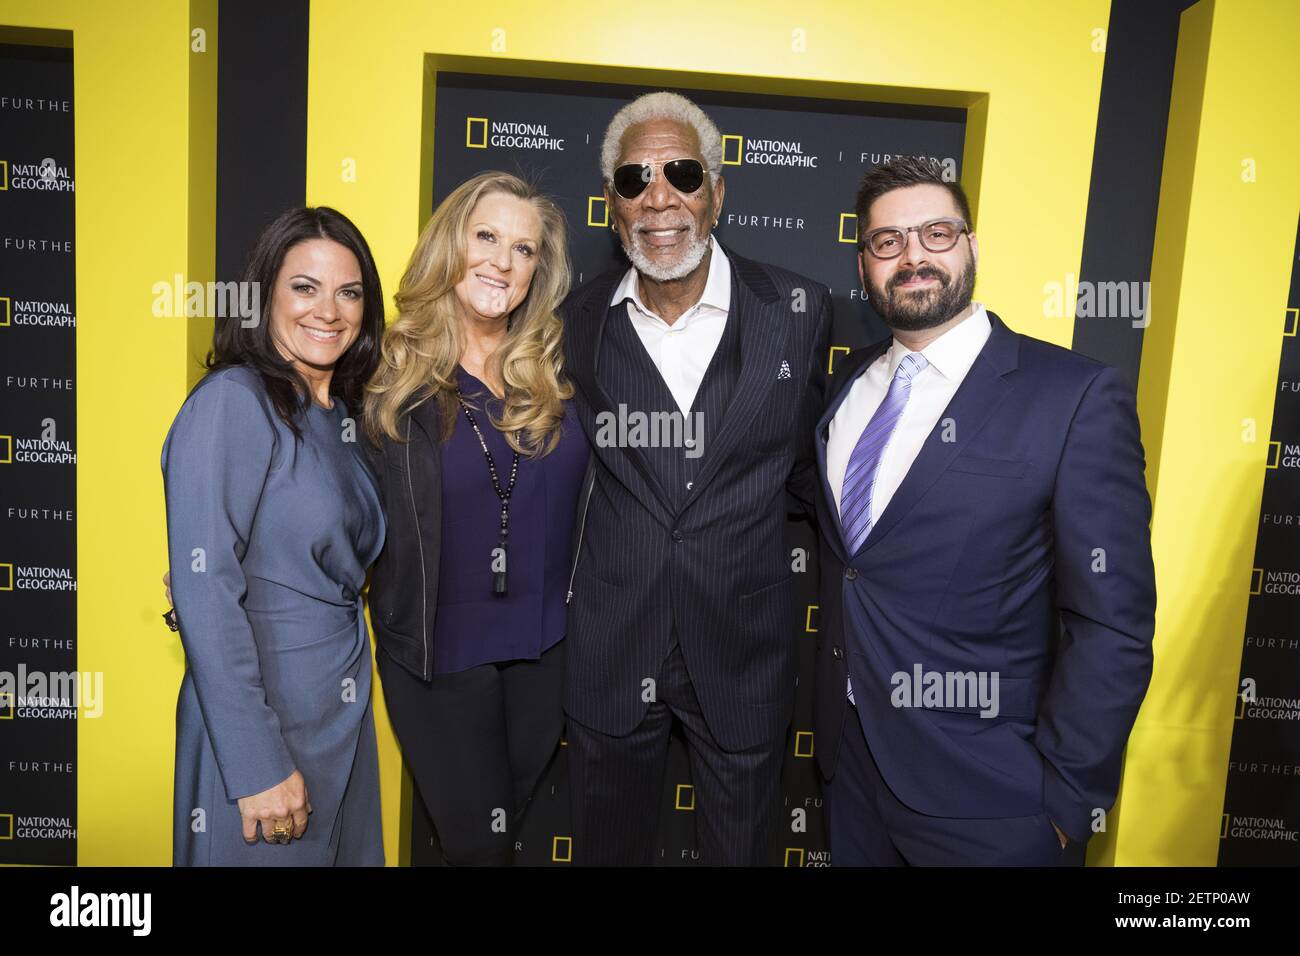 NEW YORK - APRIL 19: (L-R) CEO of National Geographic Global Networks  Courteney Monroe, Lori McCreary Executive Producer, Morgan Freeman  Actor/Host and Tim Pastore President of Original Programming & Production,  National Geographic